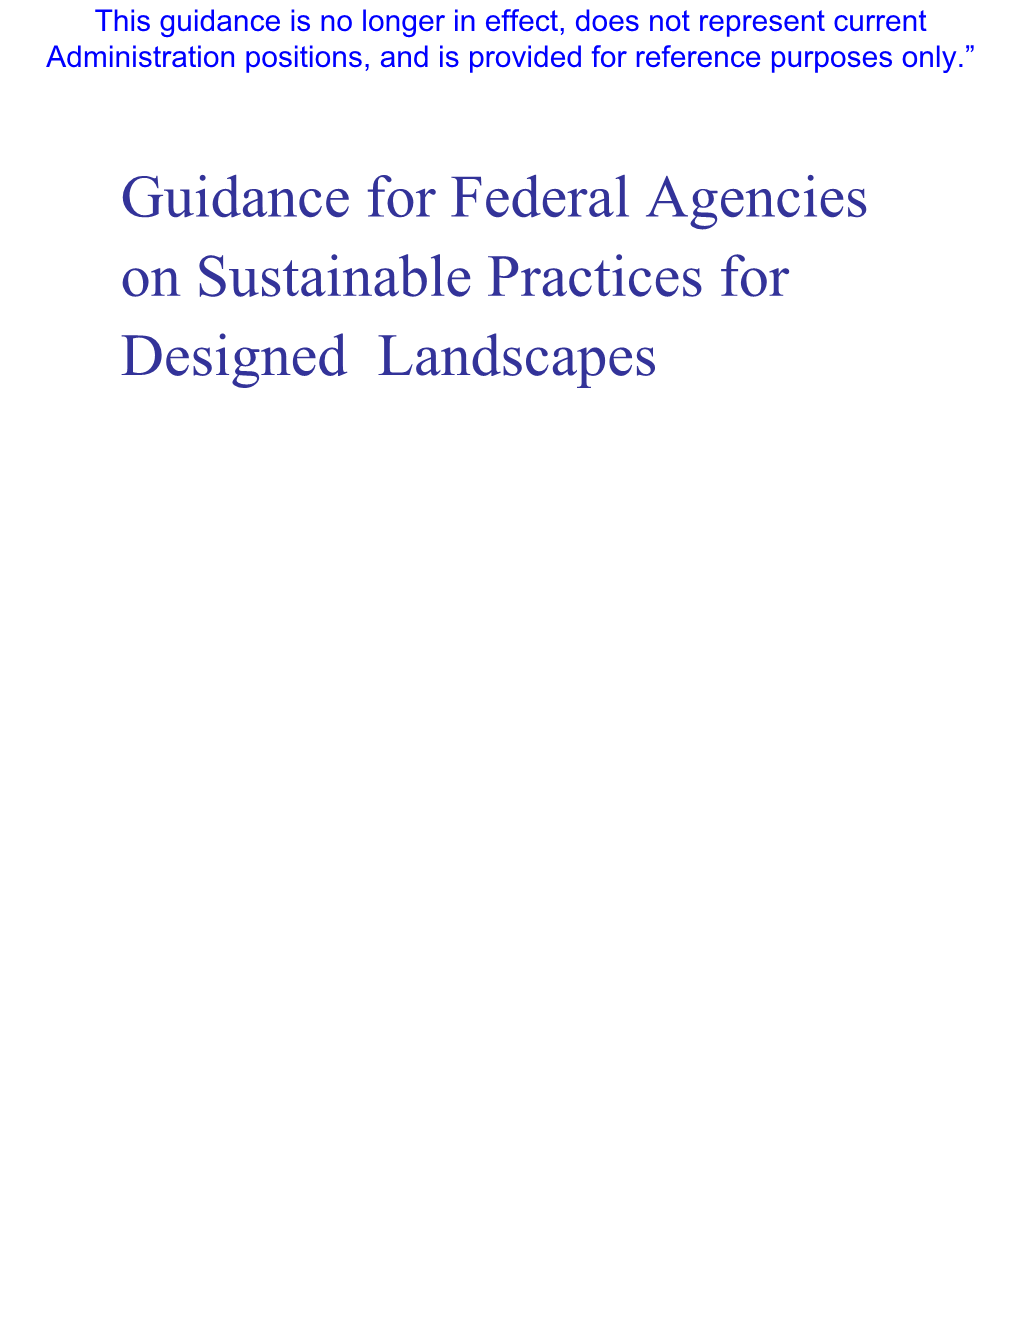 Guidance for Federal Agencies on Sustainable Practices for Designed Landscapes